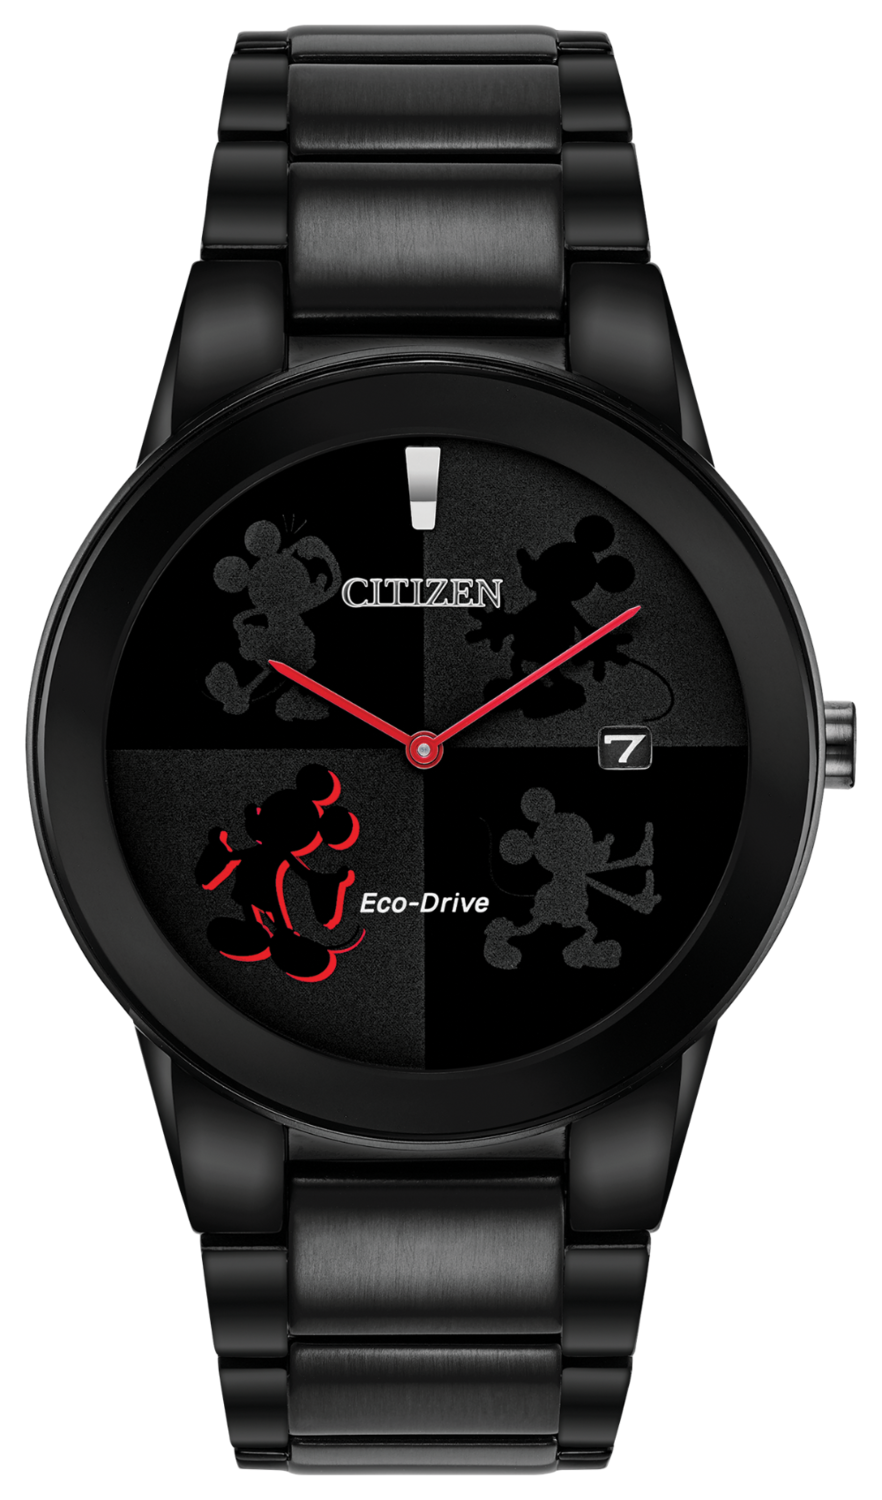 Mickey Mouse watch by Citizen,